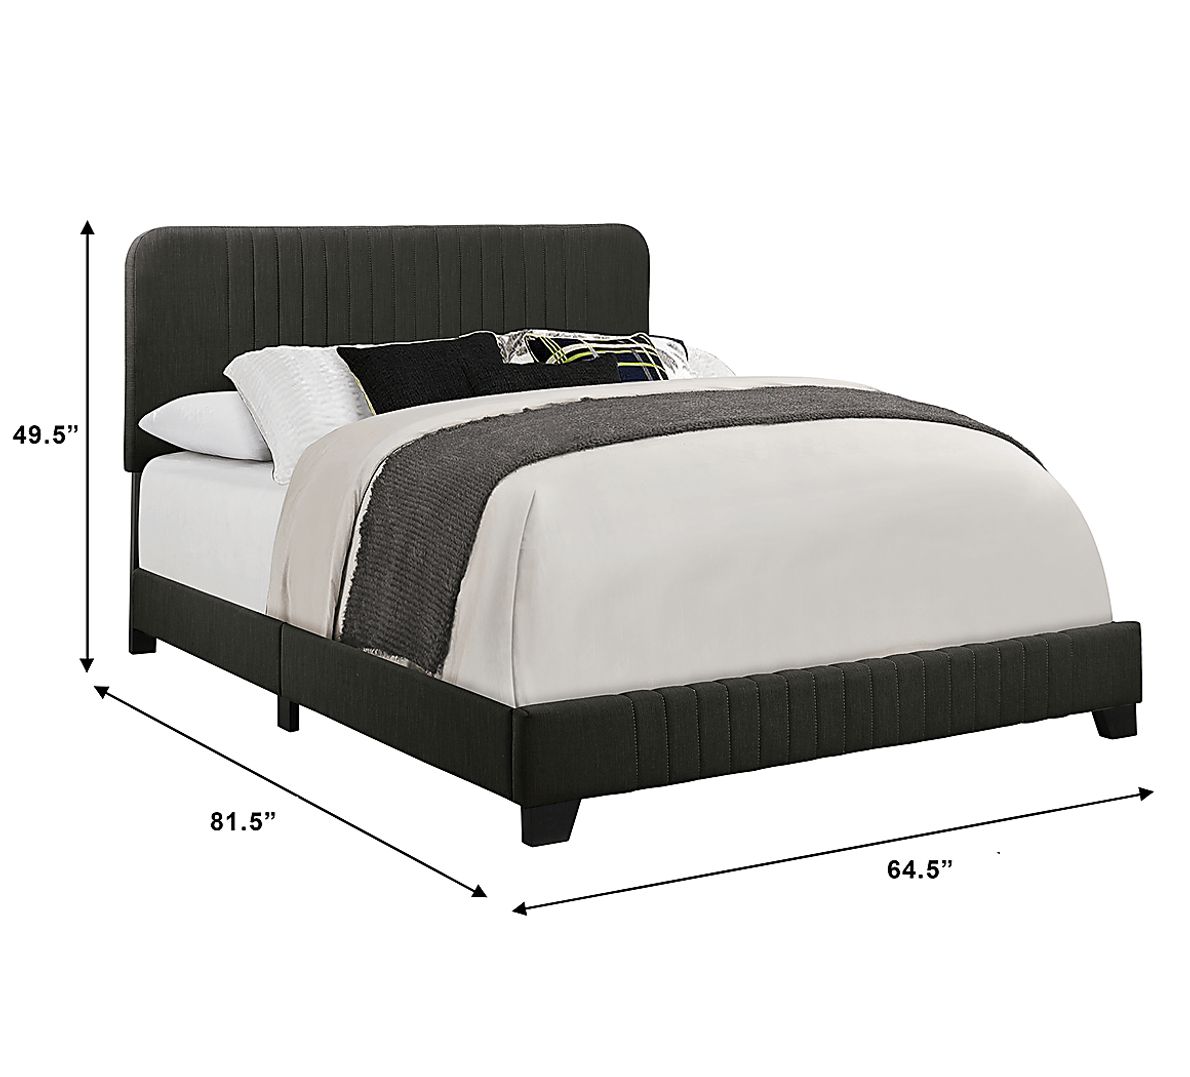 Addison Avenue Gray Queen Upholstered Bed